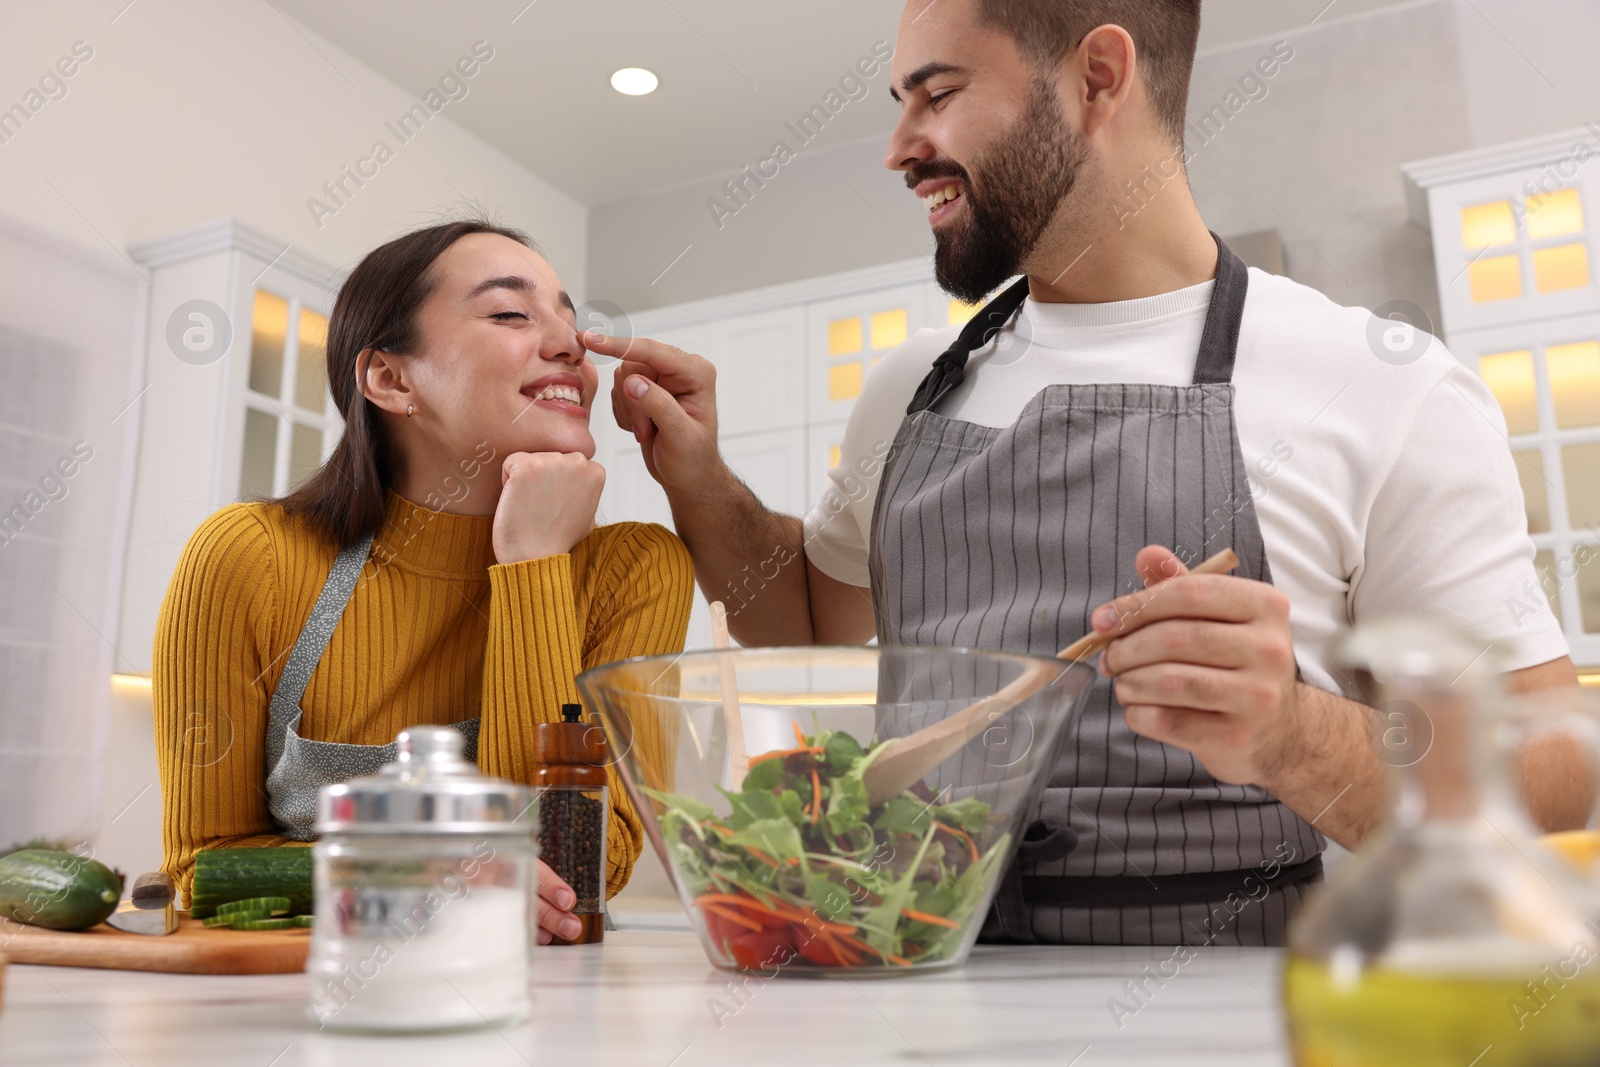 Photo of Lovely couple cooking together in kitchen, low angle view